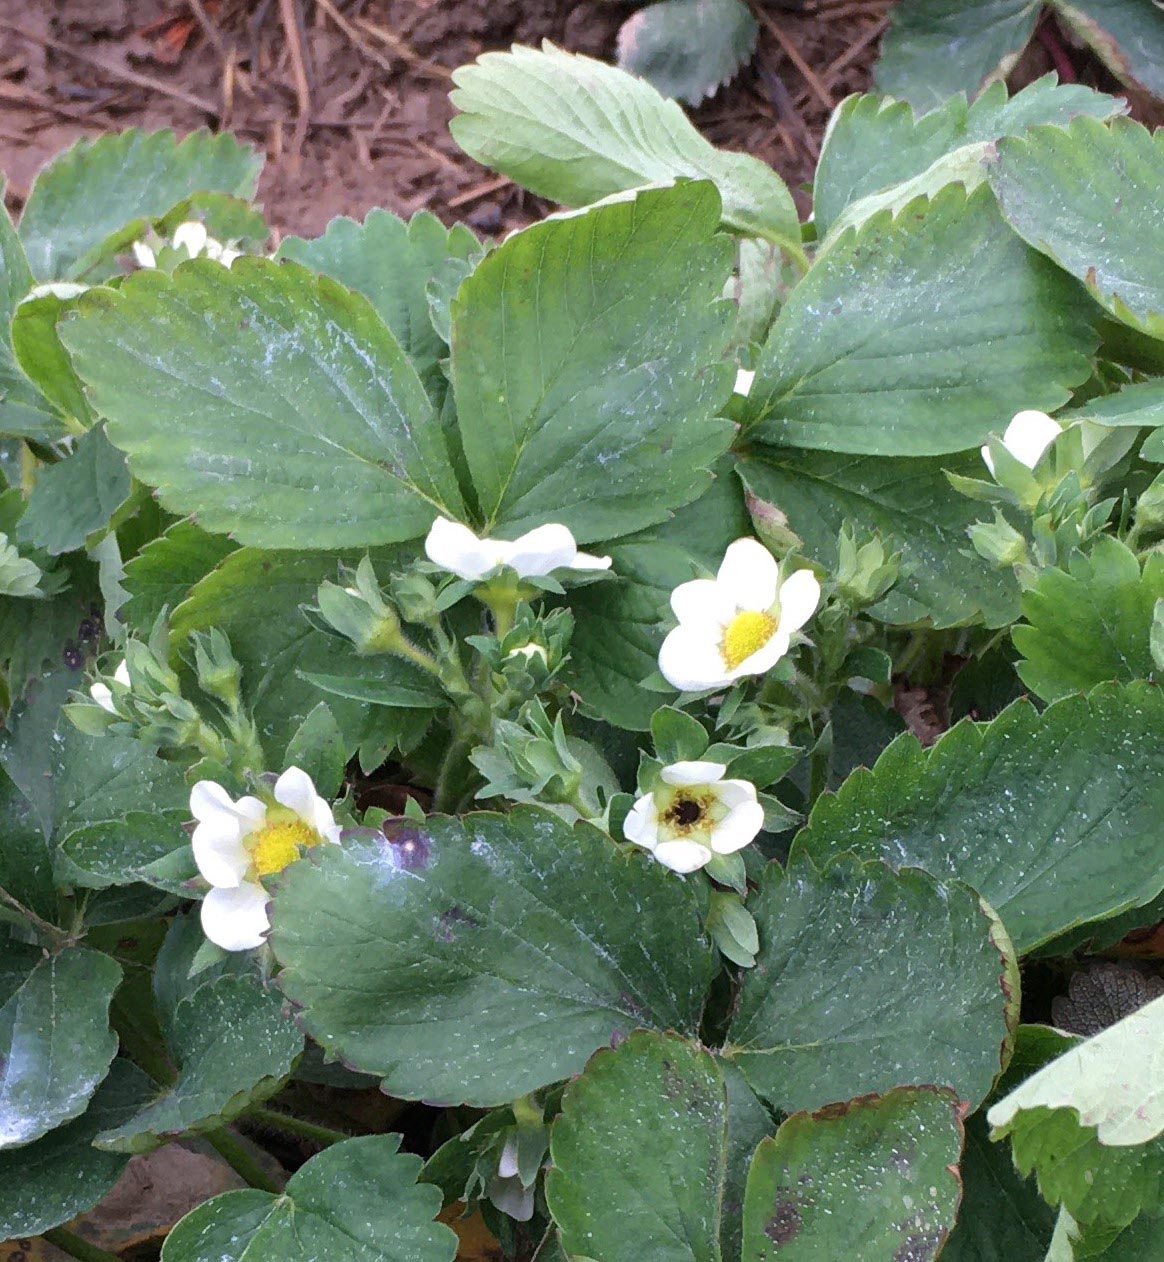 Strawberry plant with multiple blooms where lower middle one is black in the centre having been damaged by frost. The undamaged blooms (above and to left) are bright yellow in the centre.